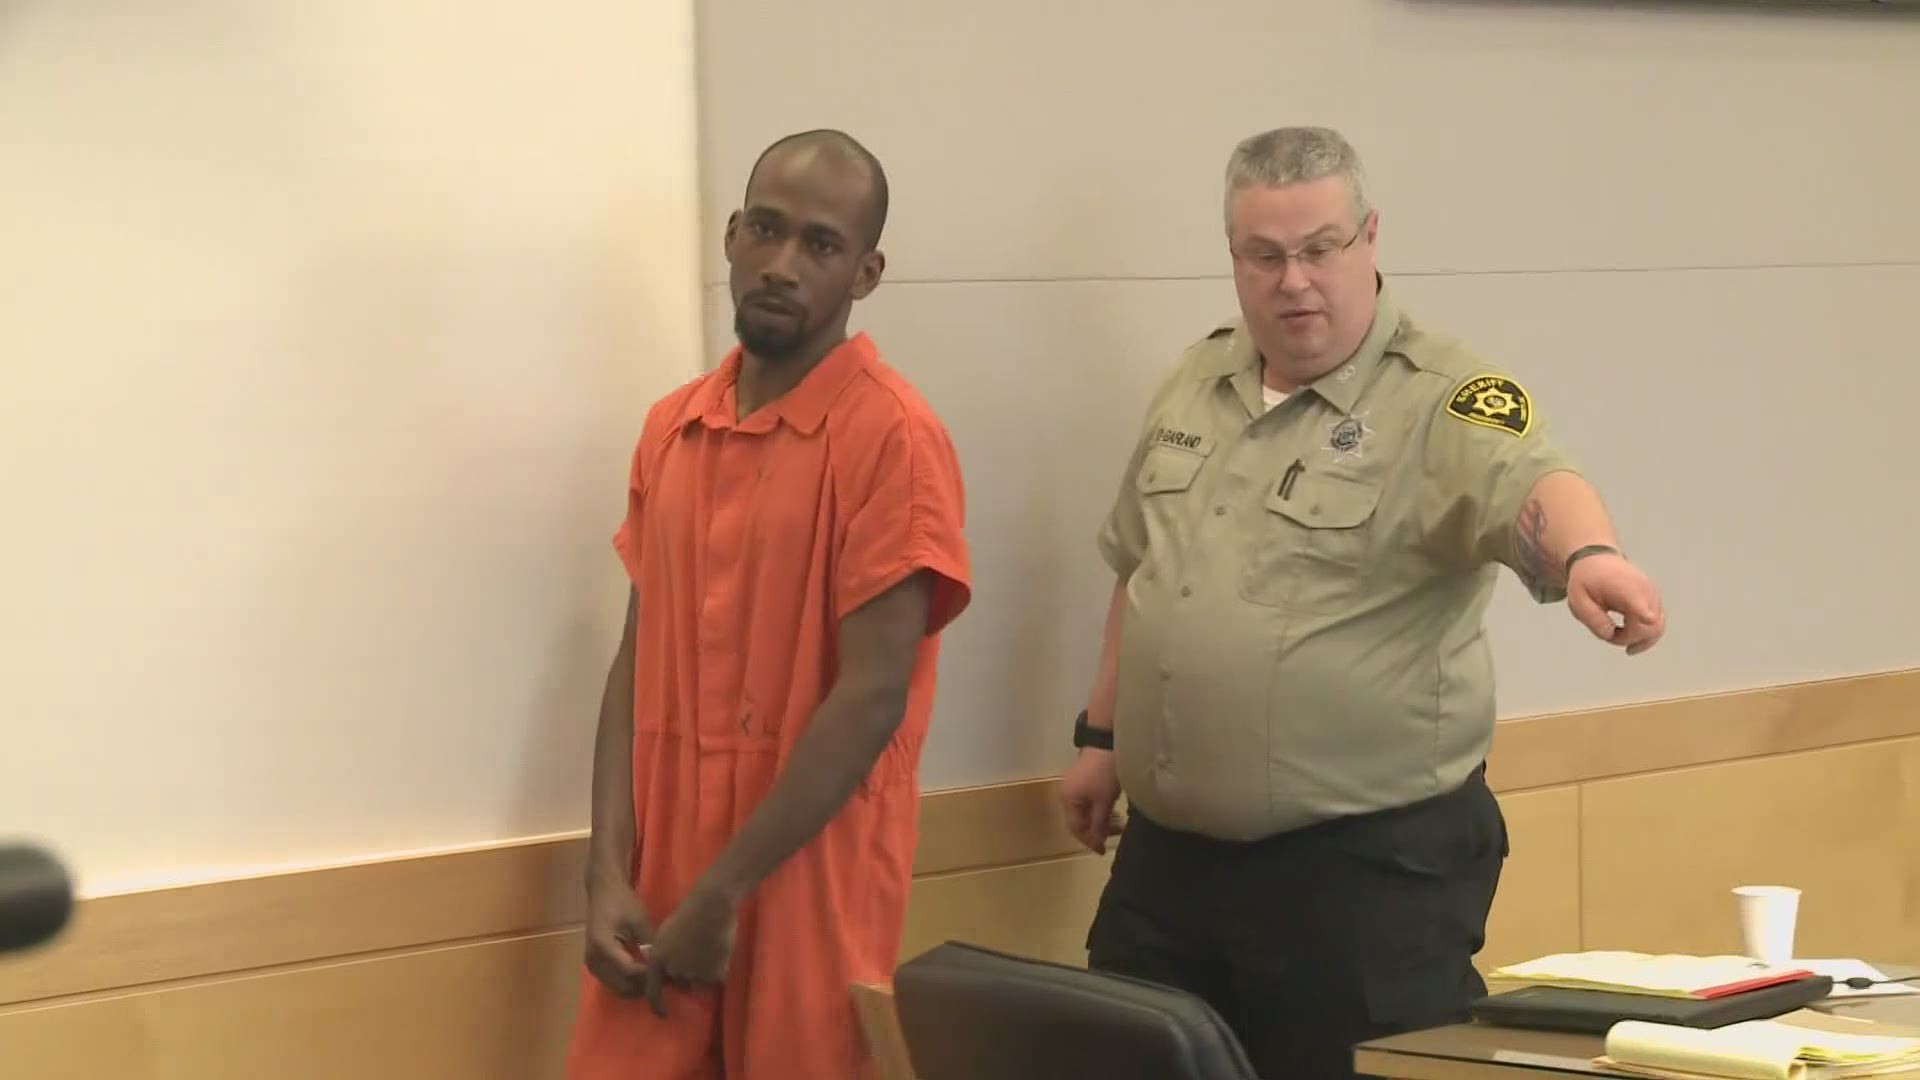 32-year-old "F" Daly was found guilty in 2019 for the murder of 51-year-old Israel Lewis.